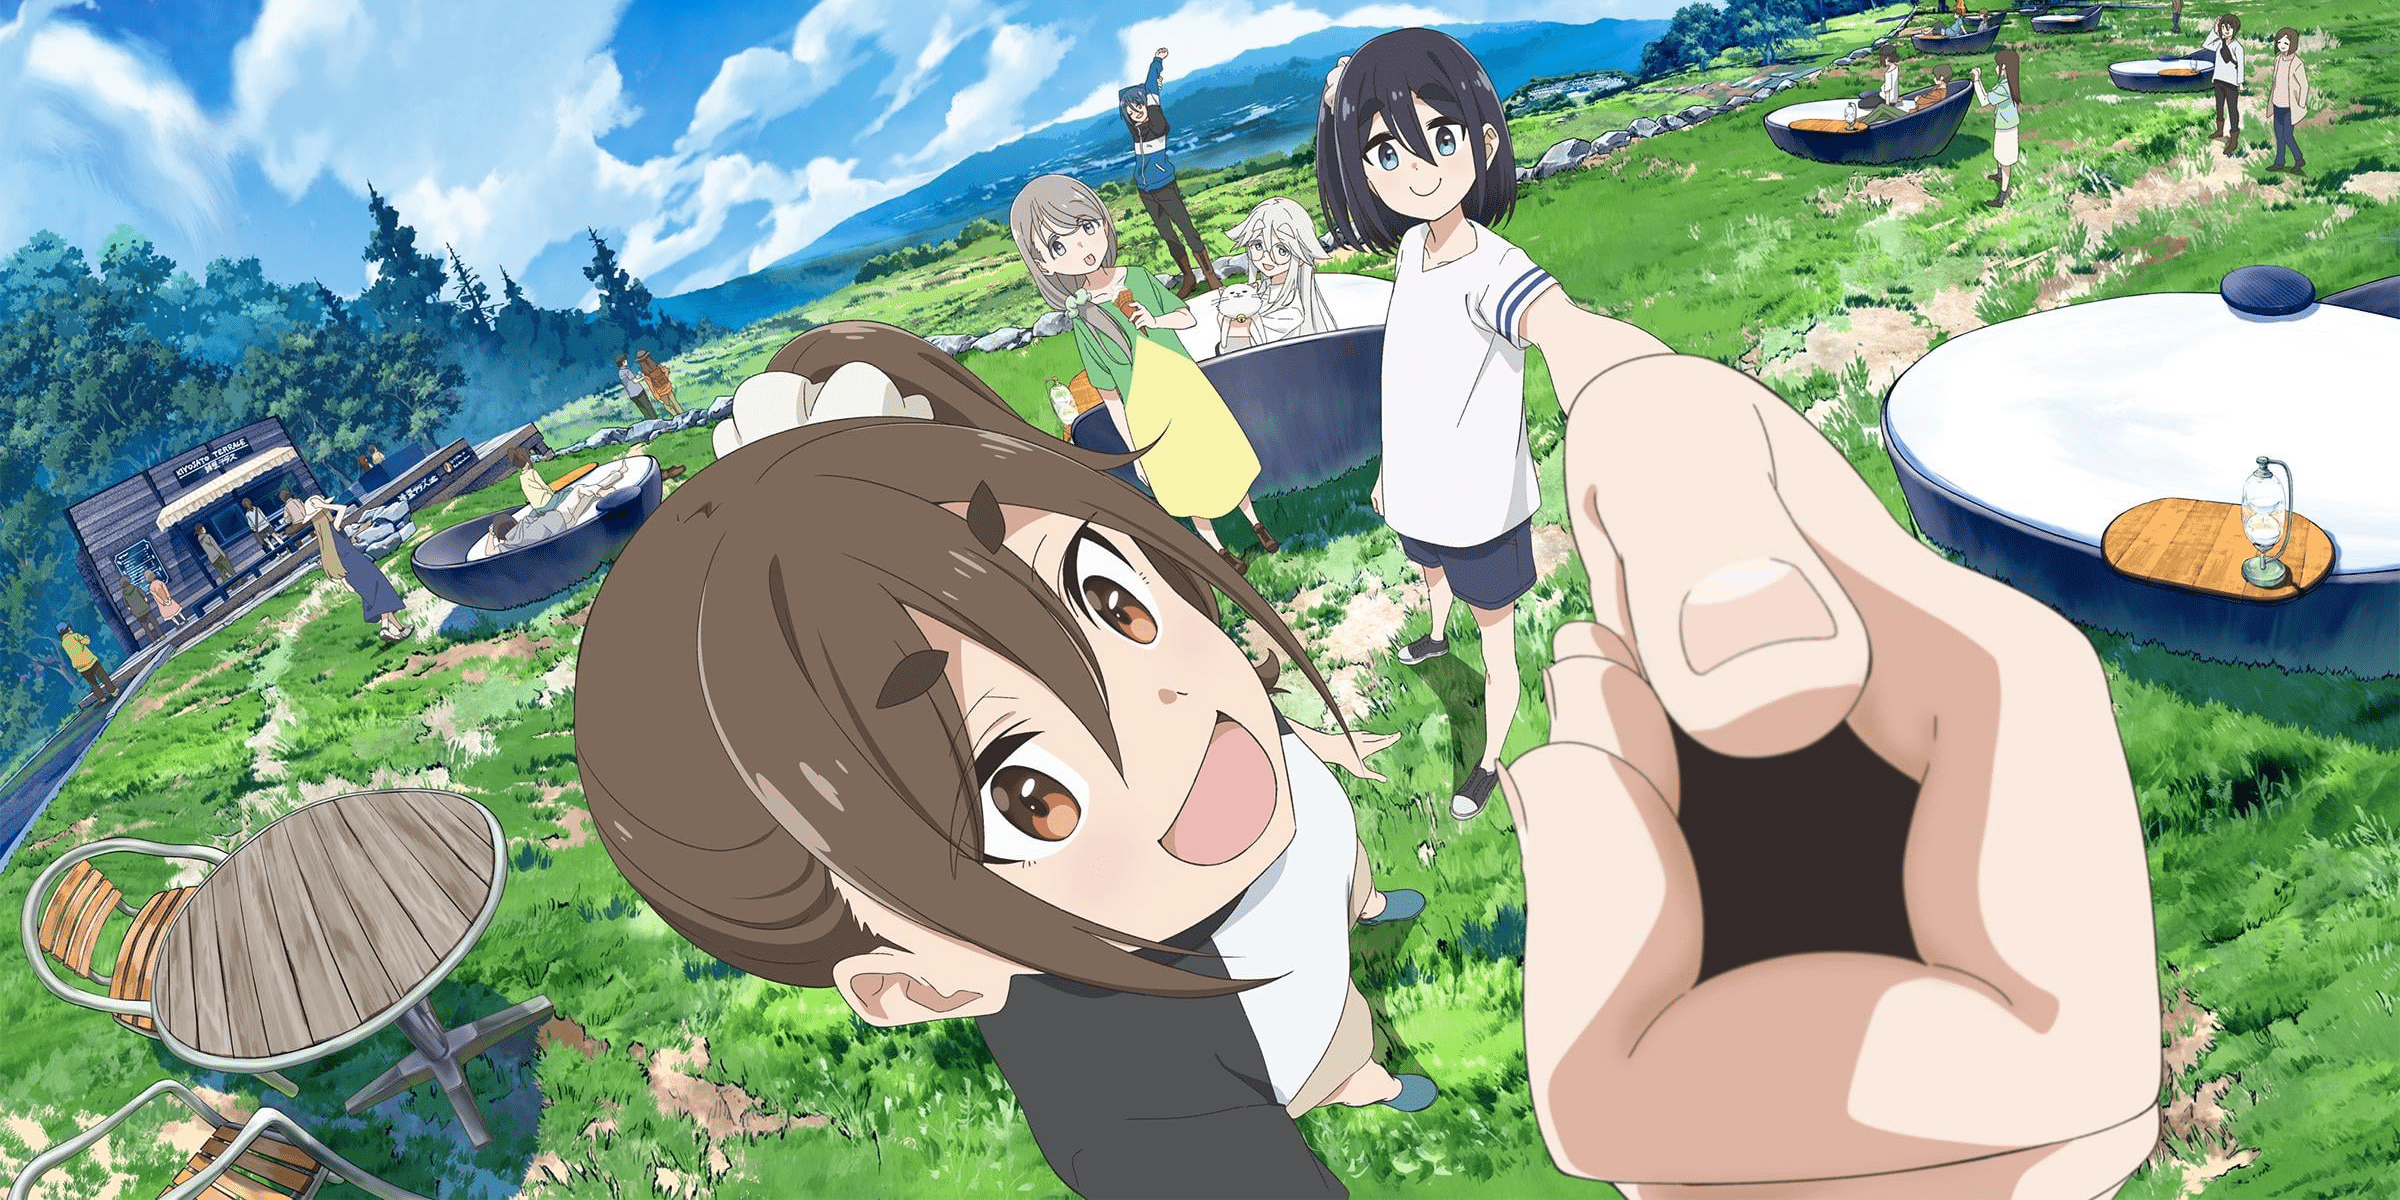 The cast of Mono pose for a fish-eye shot, as they stand in a mountain campsite, from front to back: An, Satsuki (holding an invisible camera), Sakurako, Haruno, and Kako in the distance.